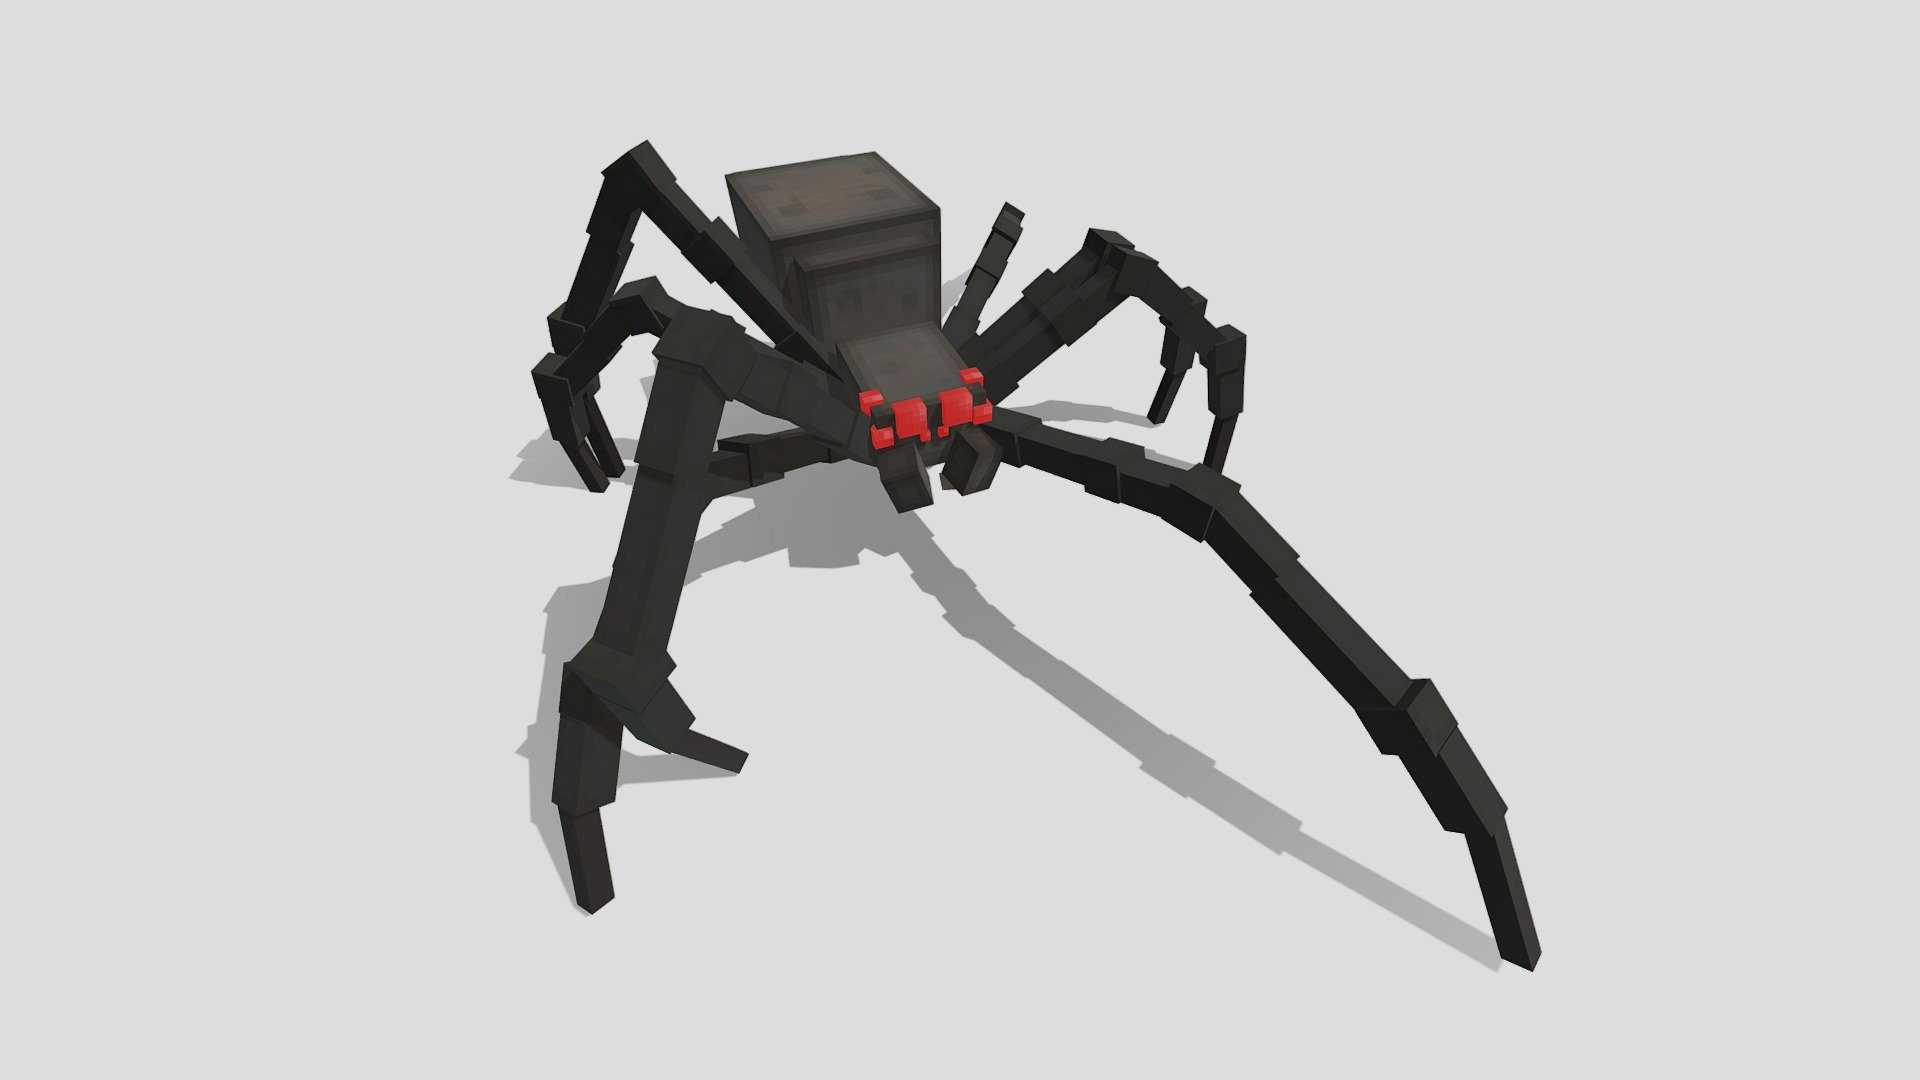 Giant Spiderling for Java Minecraft servers.
This ModelEngine ready Minecraft mob comes rigged and animated.

Get variants of this model over at https://www.artsbykevstudio.com/modelengine-marketplace

See how this model was made and animated: https://youtu.be/sc-dsCZ-2Ck

Are you looking for unique animations or custom models for a project? Reach out via https://www.twitter.com/artsbykev and/or send a business request to business.artsbykev@gmail.com
ArtsByKev commission rates may vary between projects, so try to be specific with your query.!

Visit the Official ArtsByKev store via:
https://www.artsbykevstudio.com/artsbykev-model-store
 - Spider Mob + Walk Cycle - Bedrock & ModelEngine - 3D model by ArtsByKev Productions (@ArtsByKev) 3d model